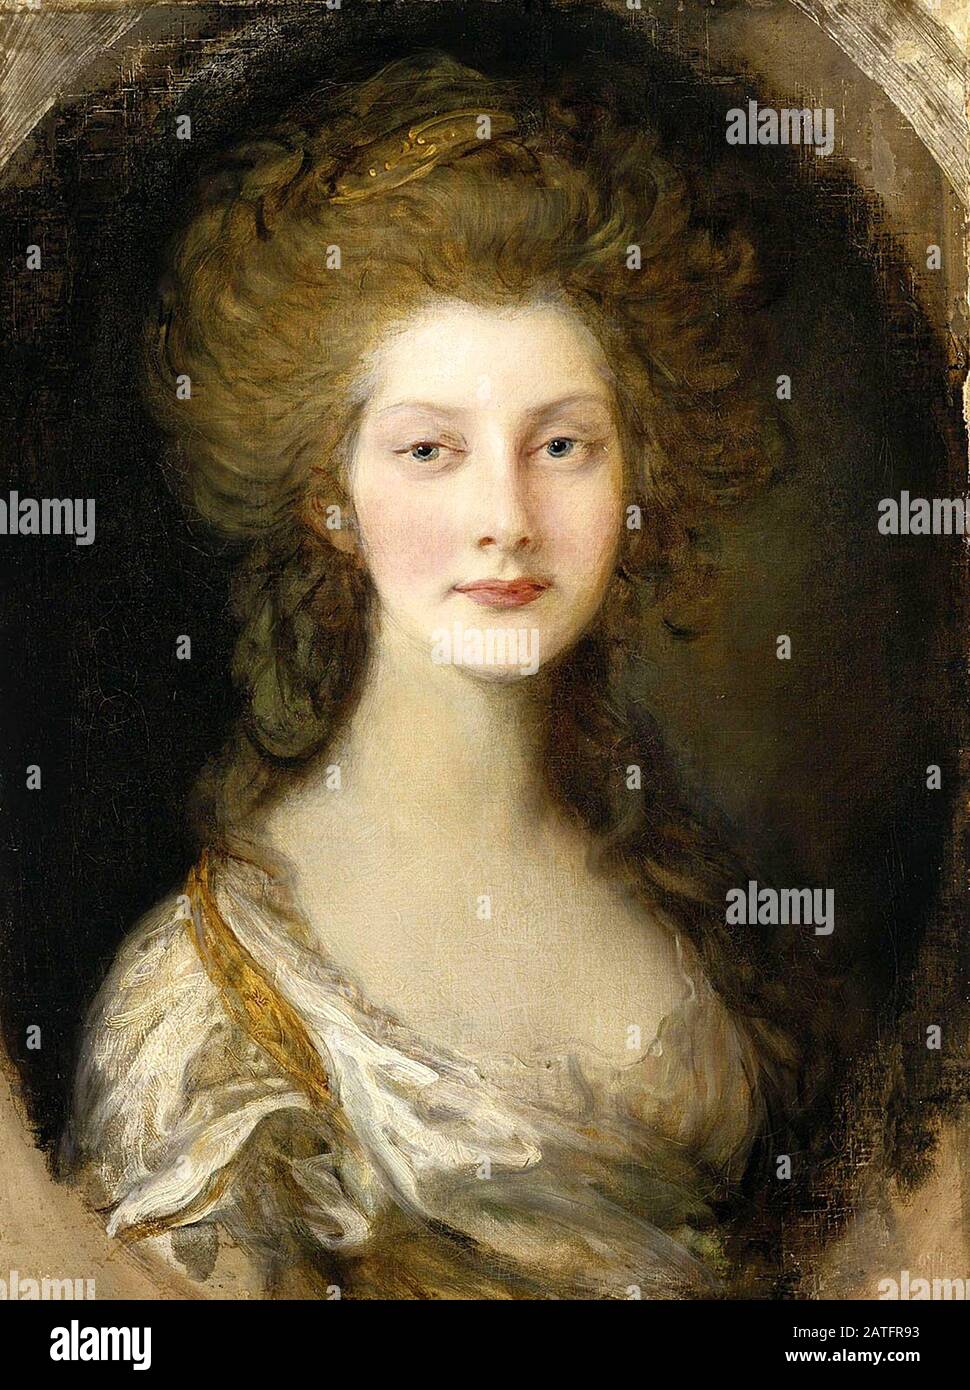 Princess Augusta, aged thirteen by Thomas Gainsborough. Princess Augusta Sophia of the United Kingdom (1768 – 1840) sixth child and second daughter of King George III and Queen Charlotte. Stock Photo